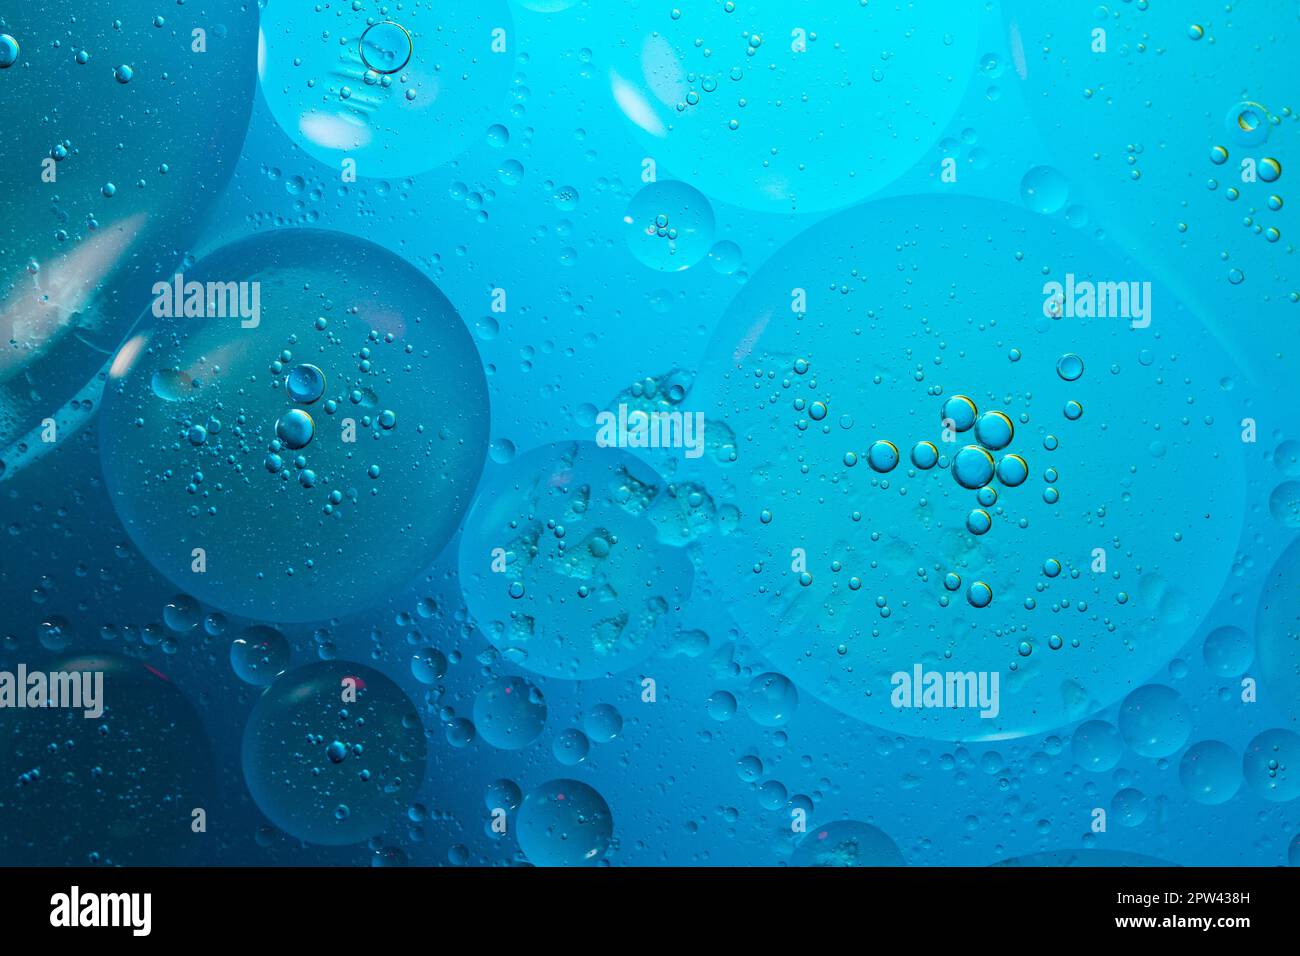 Oil on water Stock Photo - Alamy